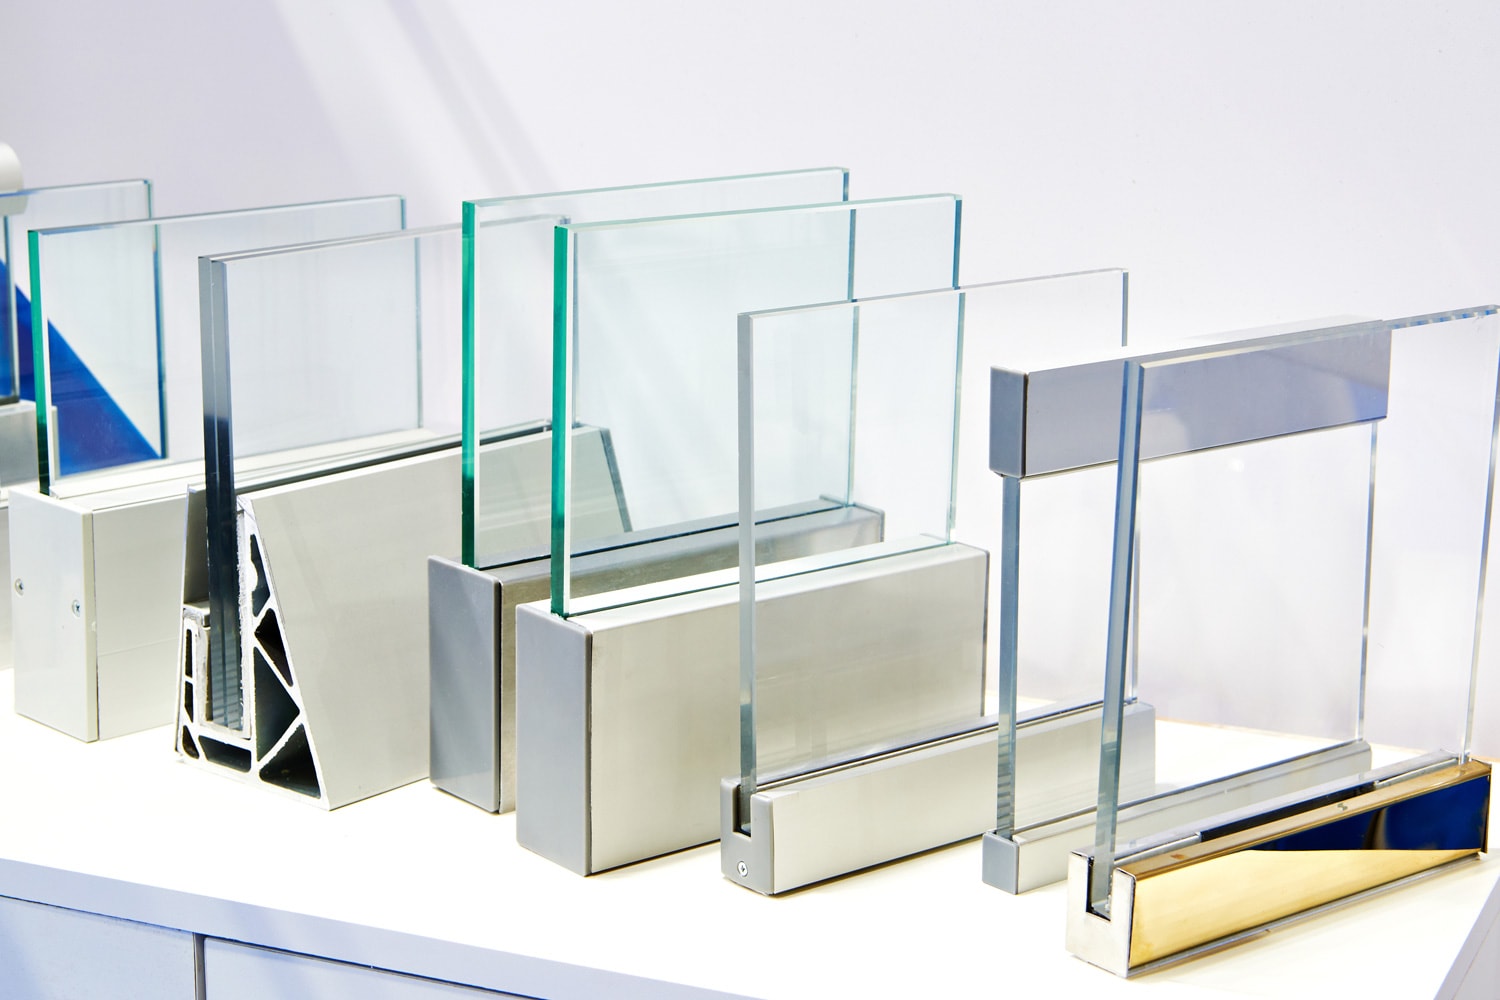 Samples of thick glass in frames in the exhibition store business